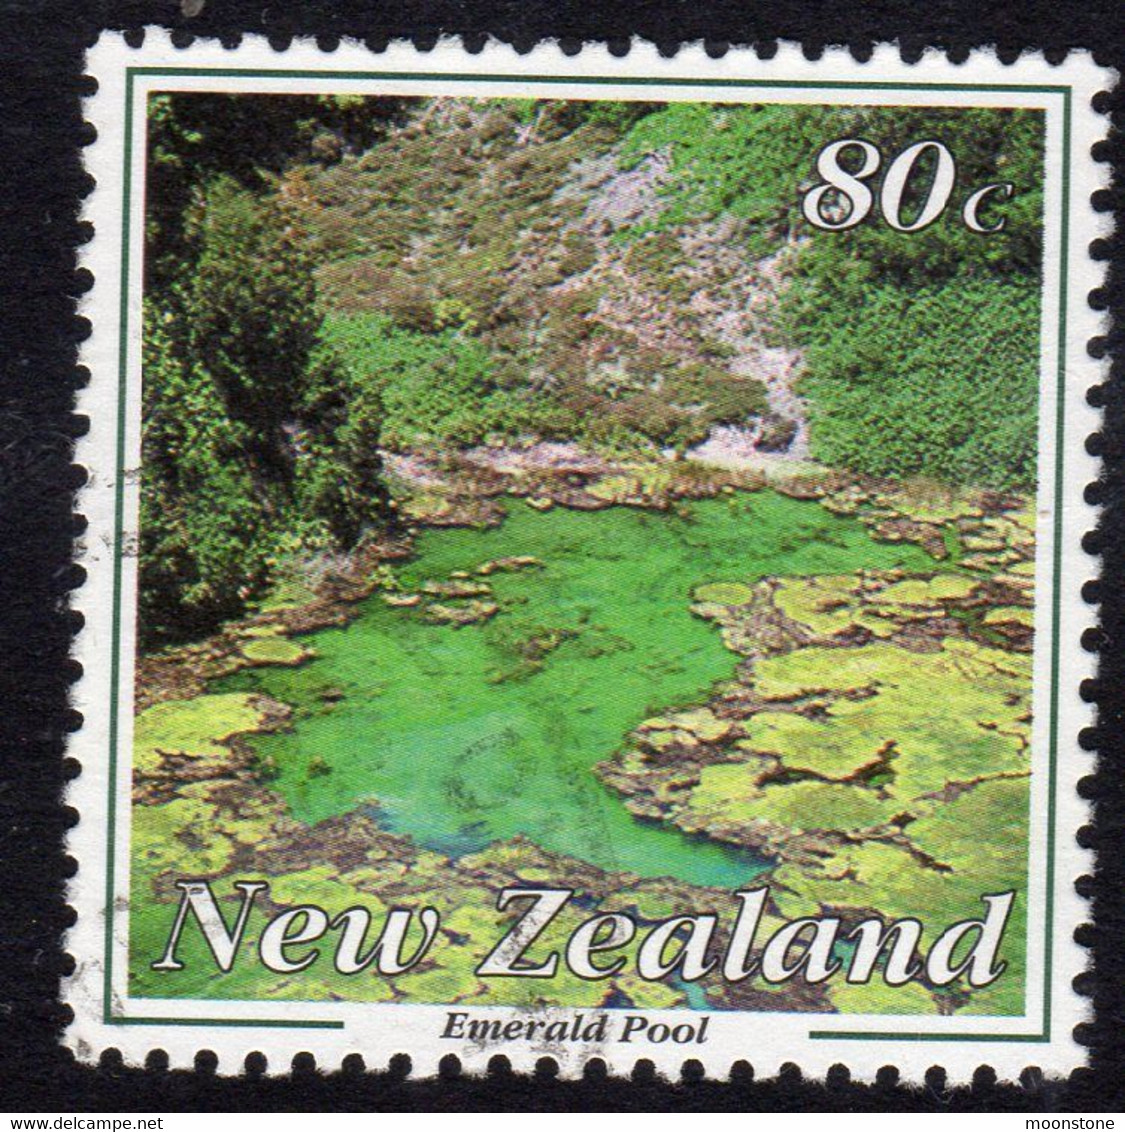 New Zealand 1993 Thermal Wonders 80c Value, Used, SG 1732 - Used Stamps